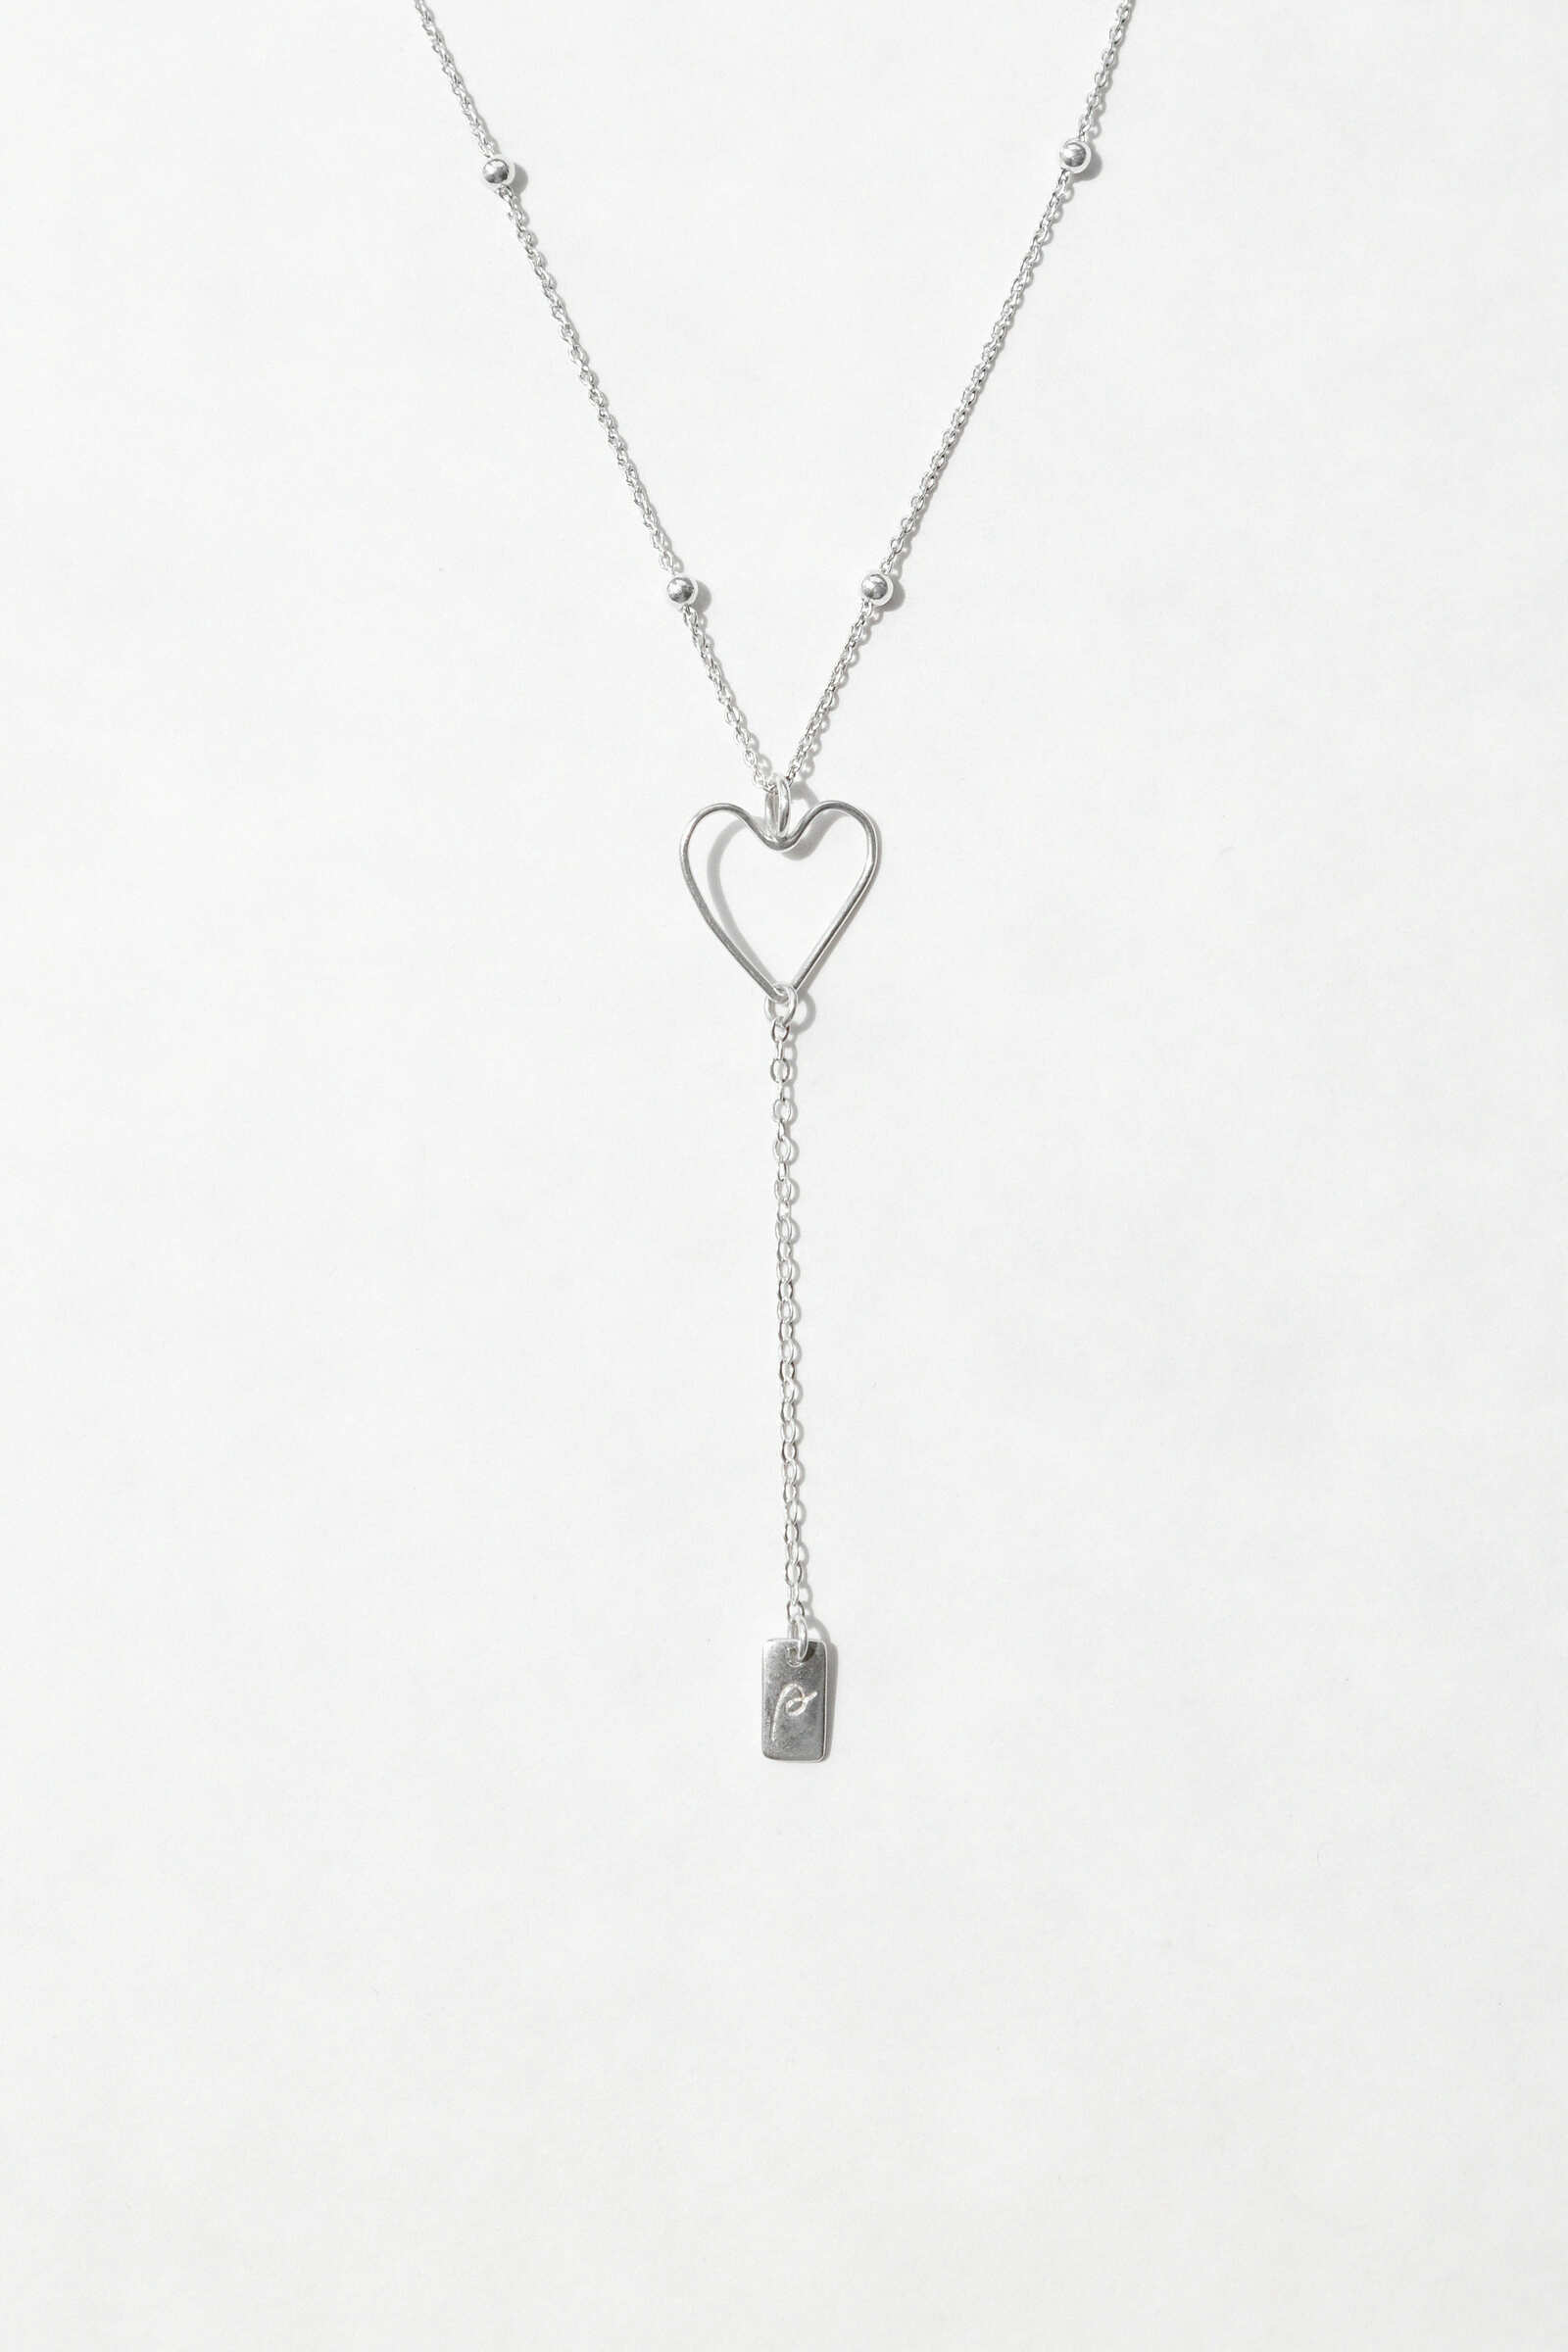 Lover's Name Tag Necklace.jpg